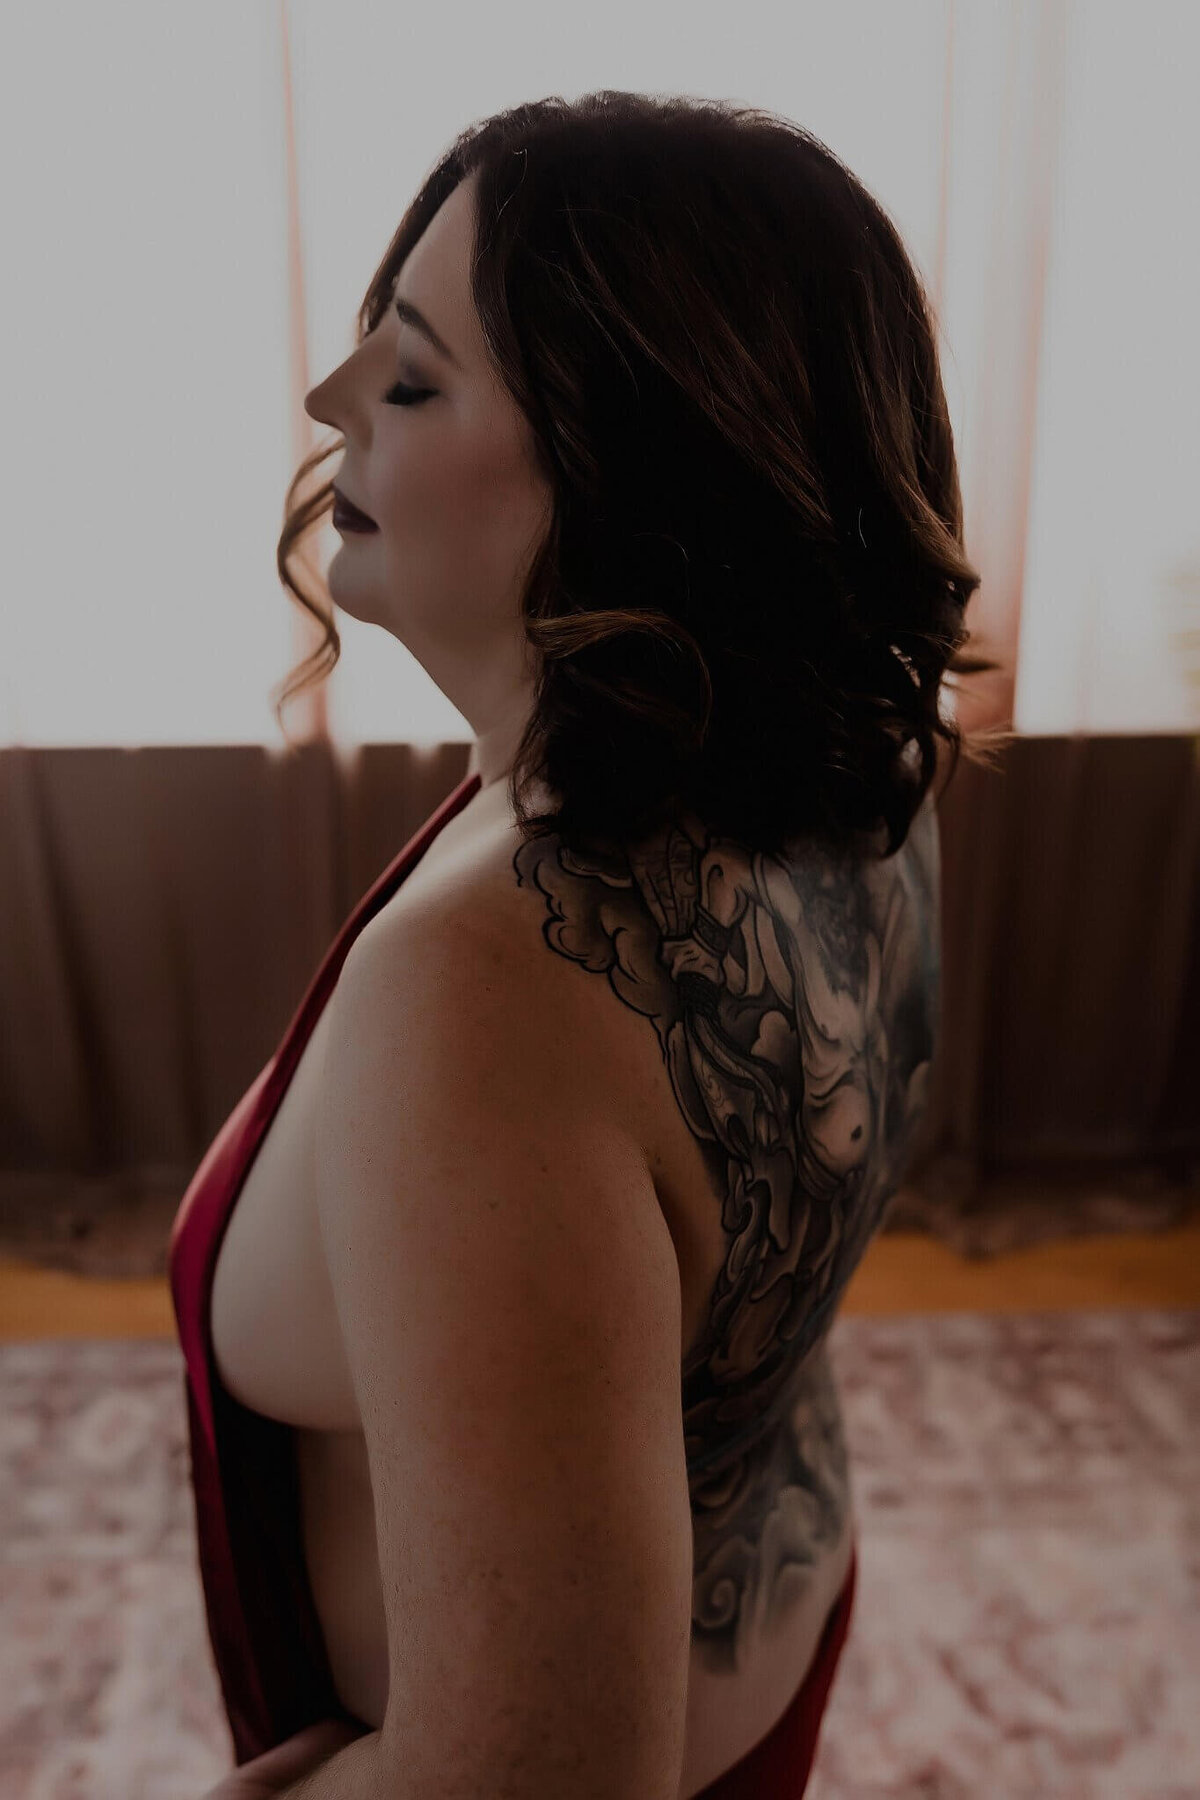 woman wrapped in a sheet with open back showing tattoo